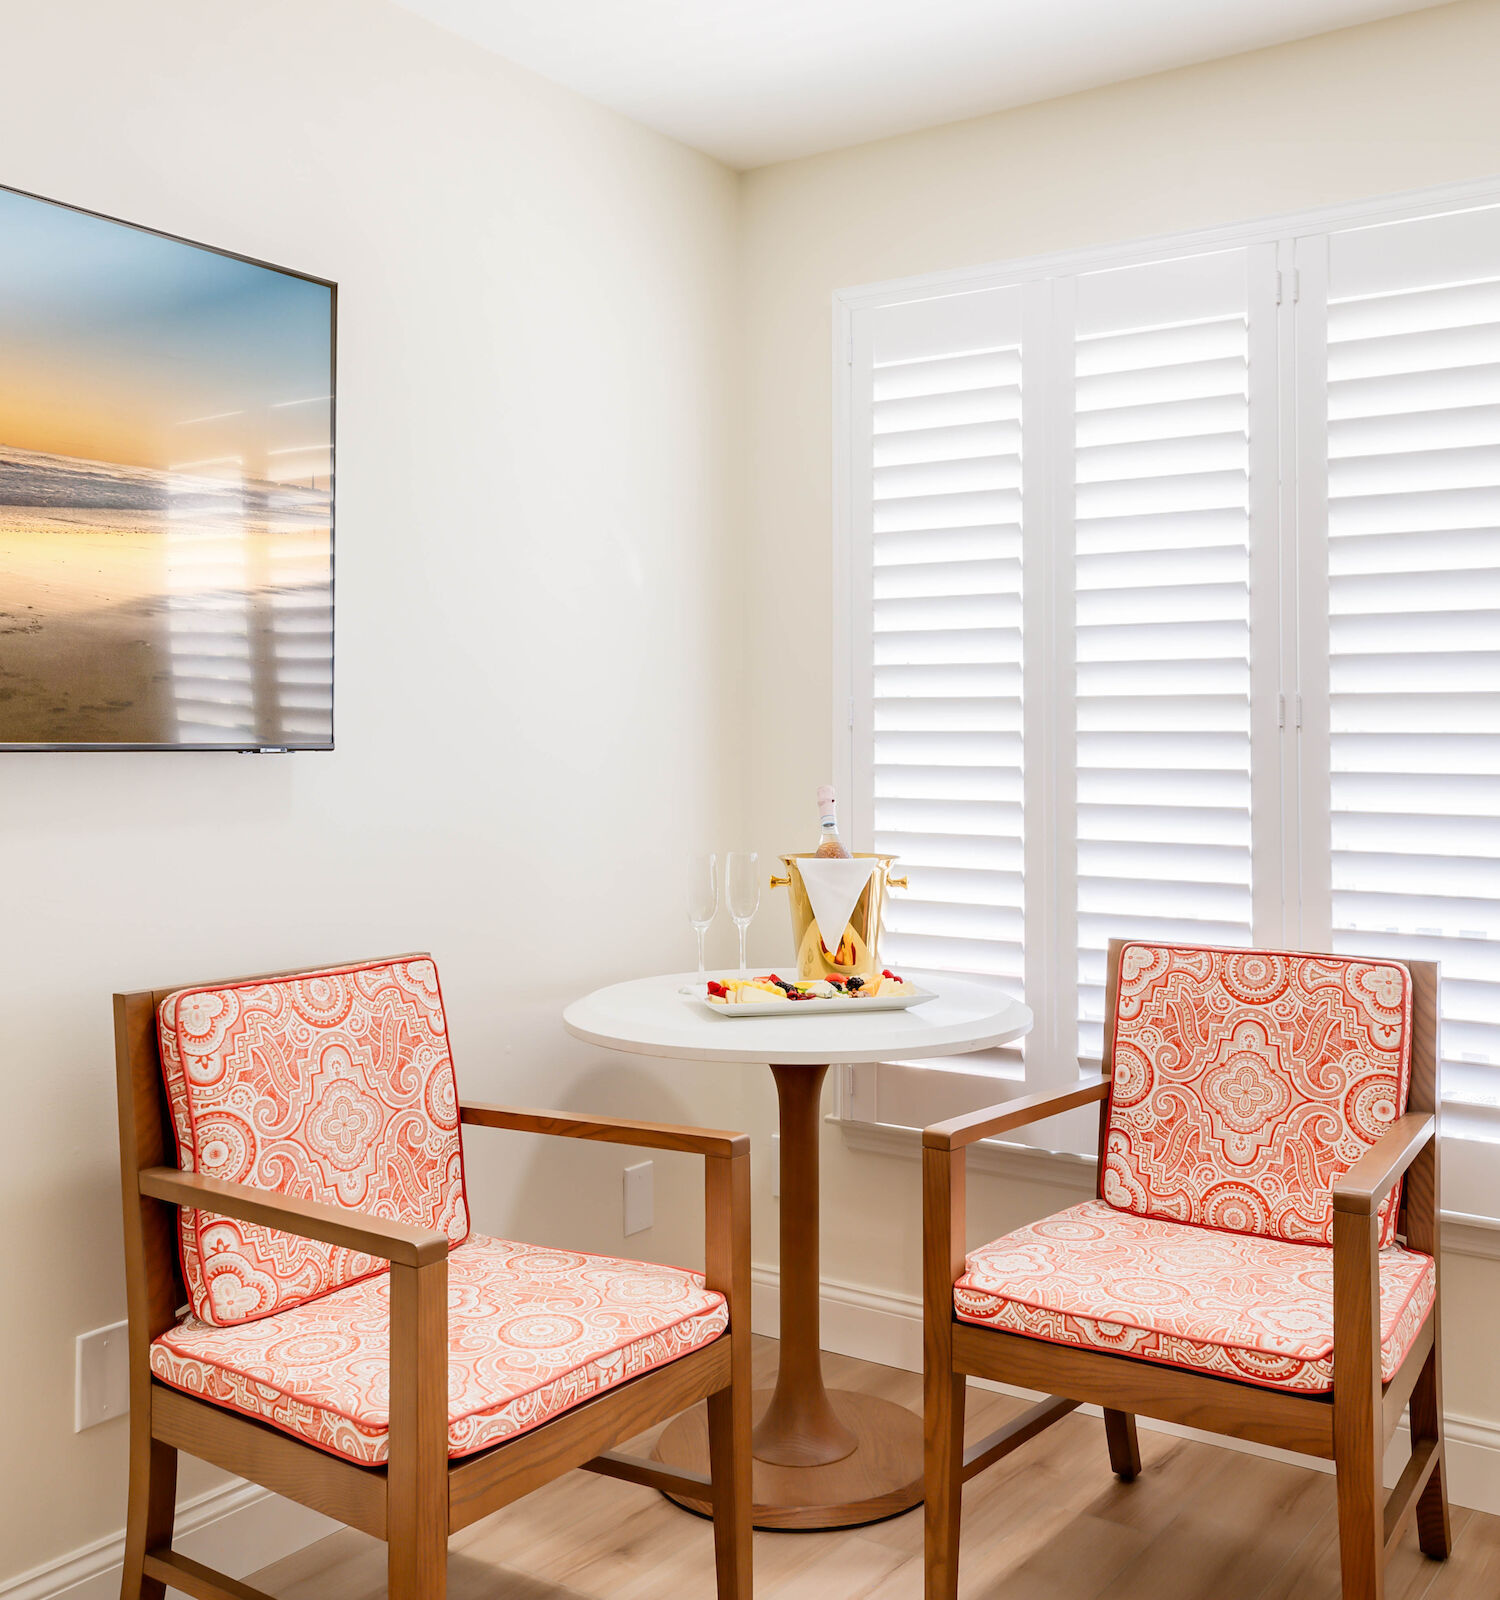 A small, bright room with two patterned chairs around a round table, a tray with a coffee pot and cups, a beach photograph on the wall, and white shutters.